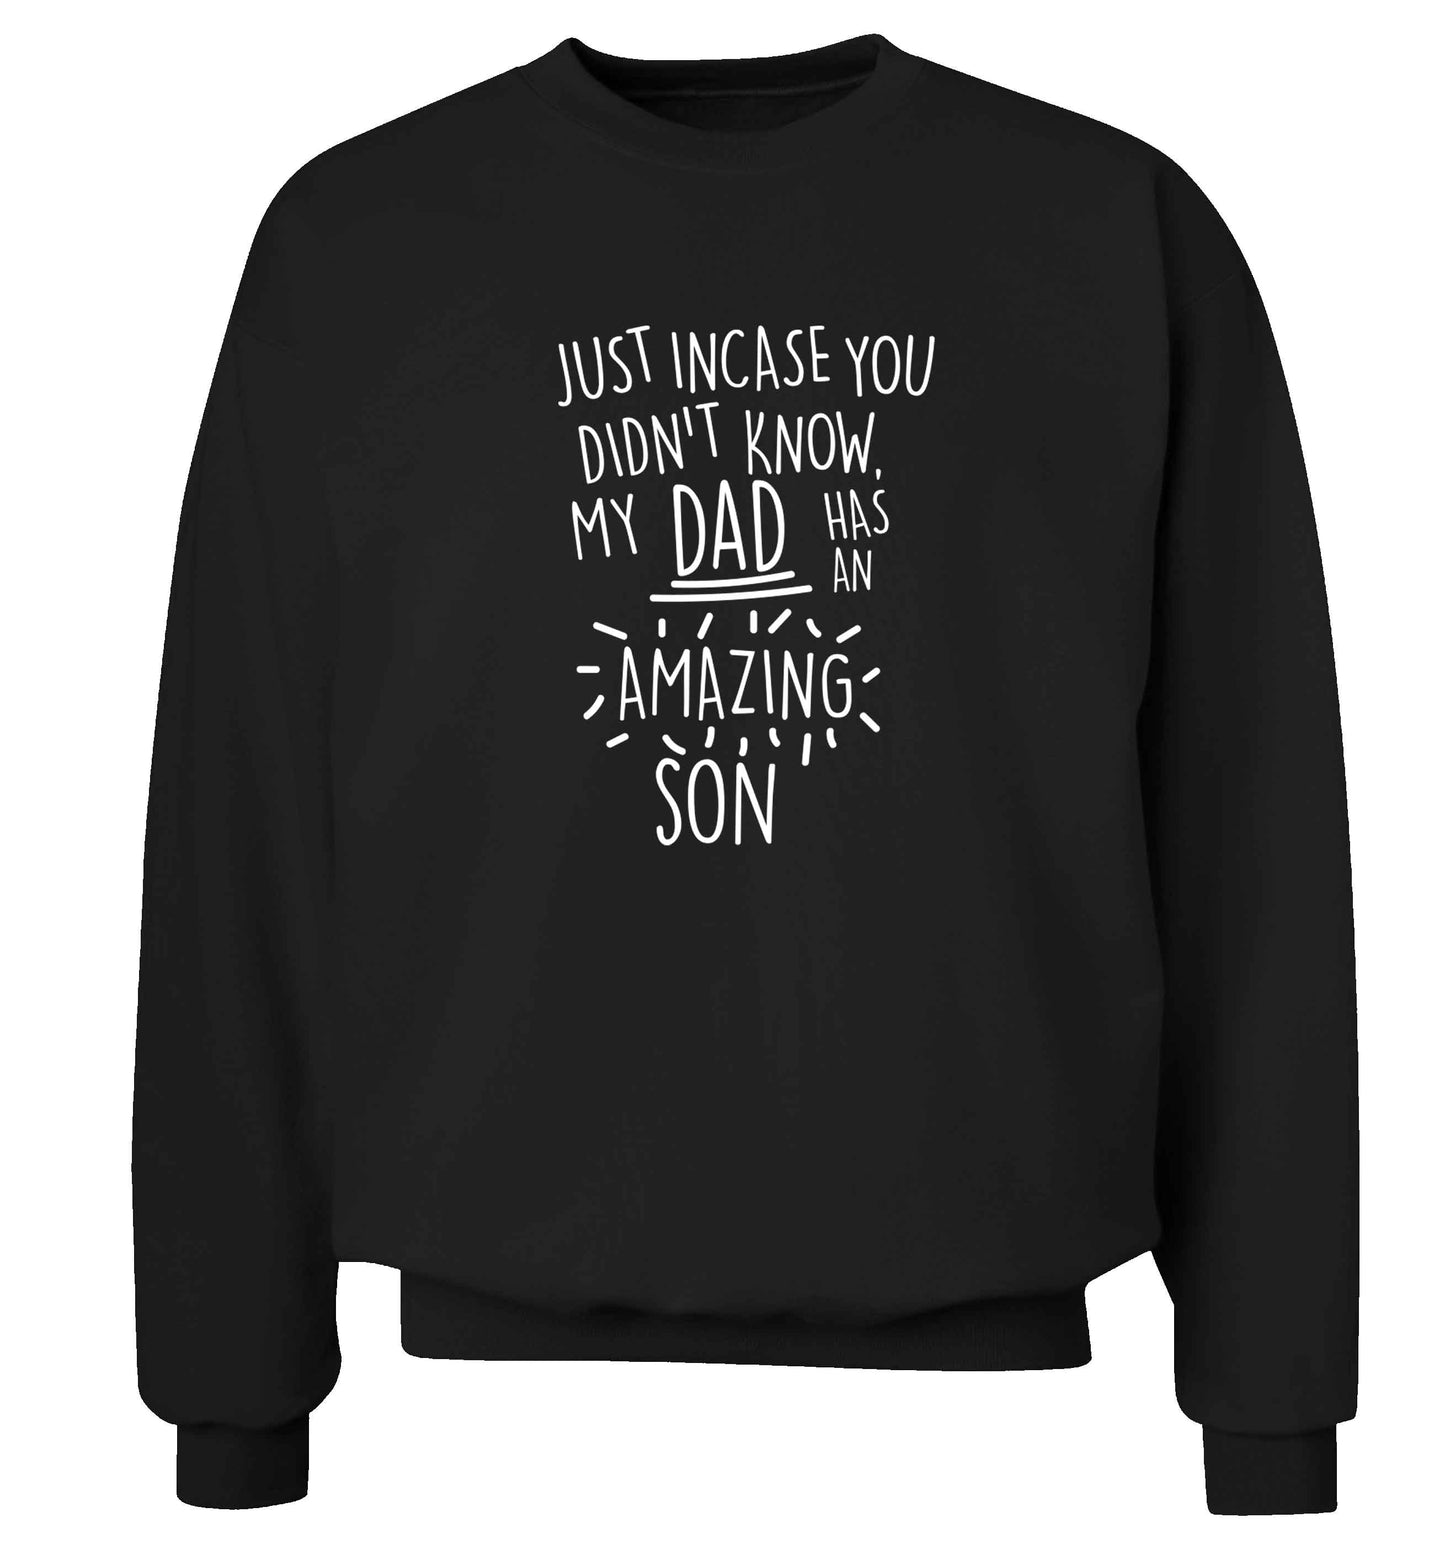 Just incase you didn't know my dad has an amazing son adult's unisex black sweater 2XL